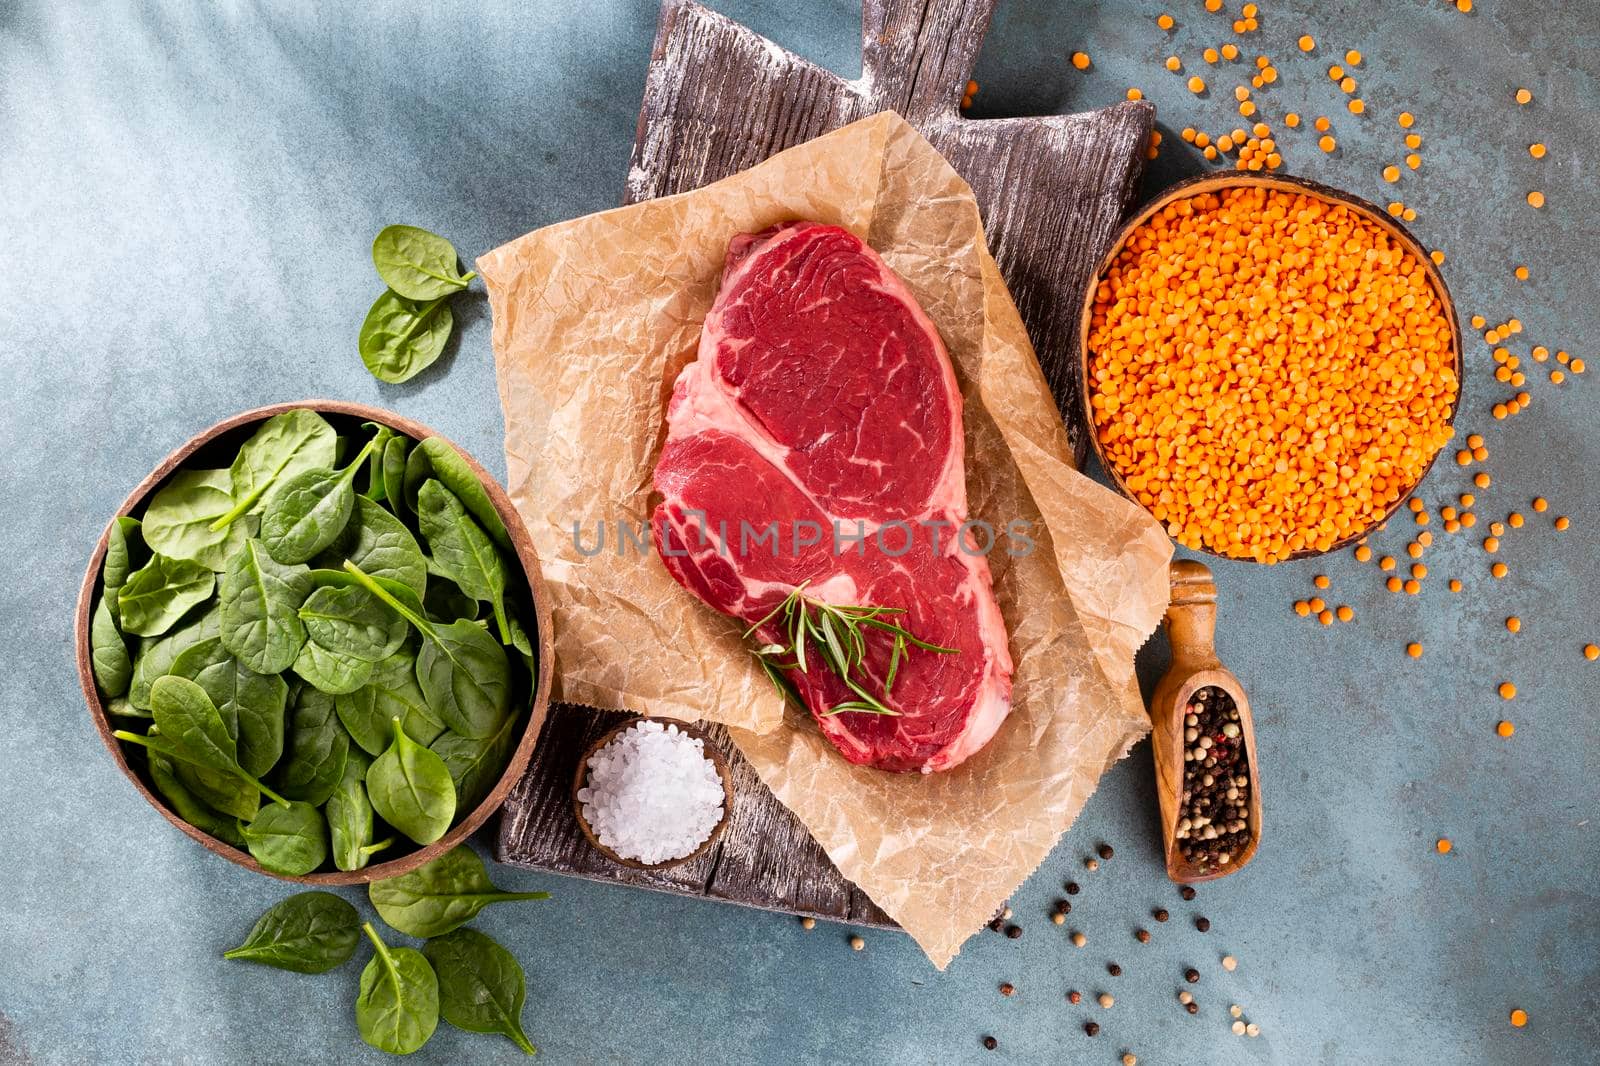 Fresh raw rib-eye steak on wooden cutting board, with spinach, lentils and rosmary in a rustic style.